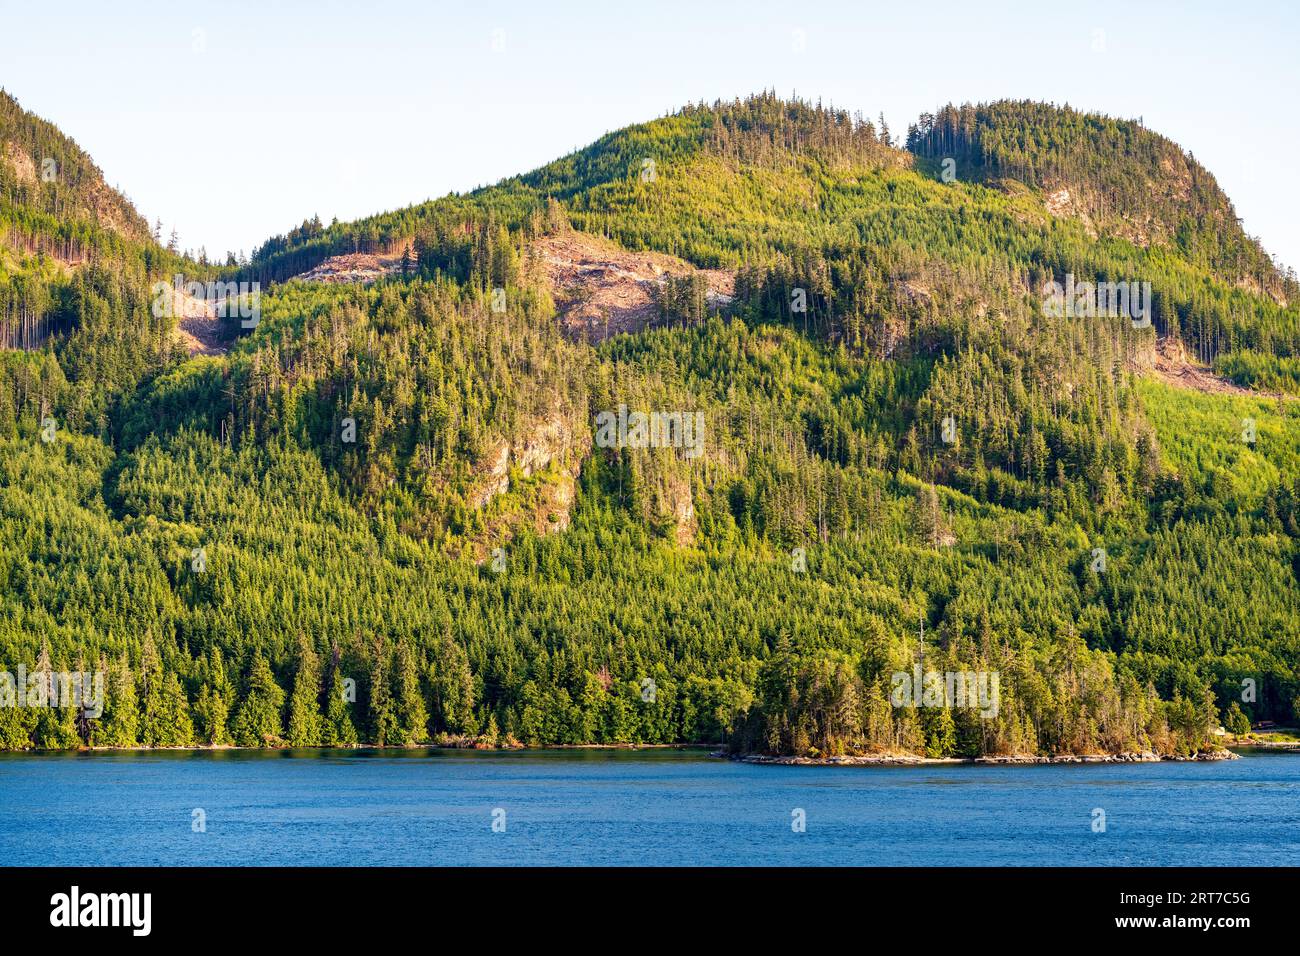 Vancouver Island mountainside shows scars from sustainable logging, seen from 'Inside Passage' cruise to Alaska. Stock Photo